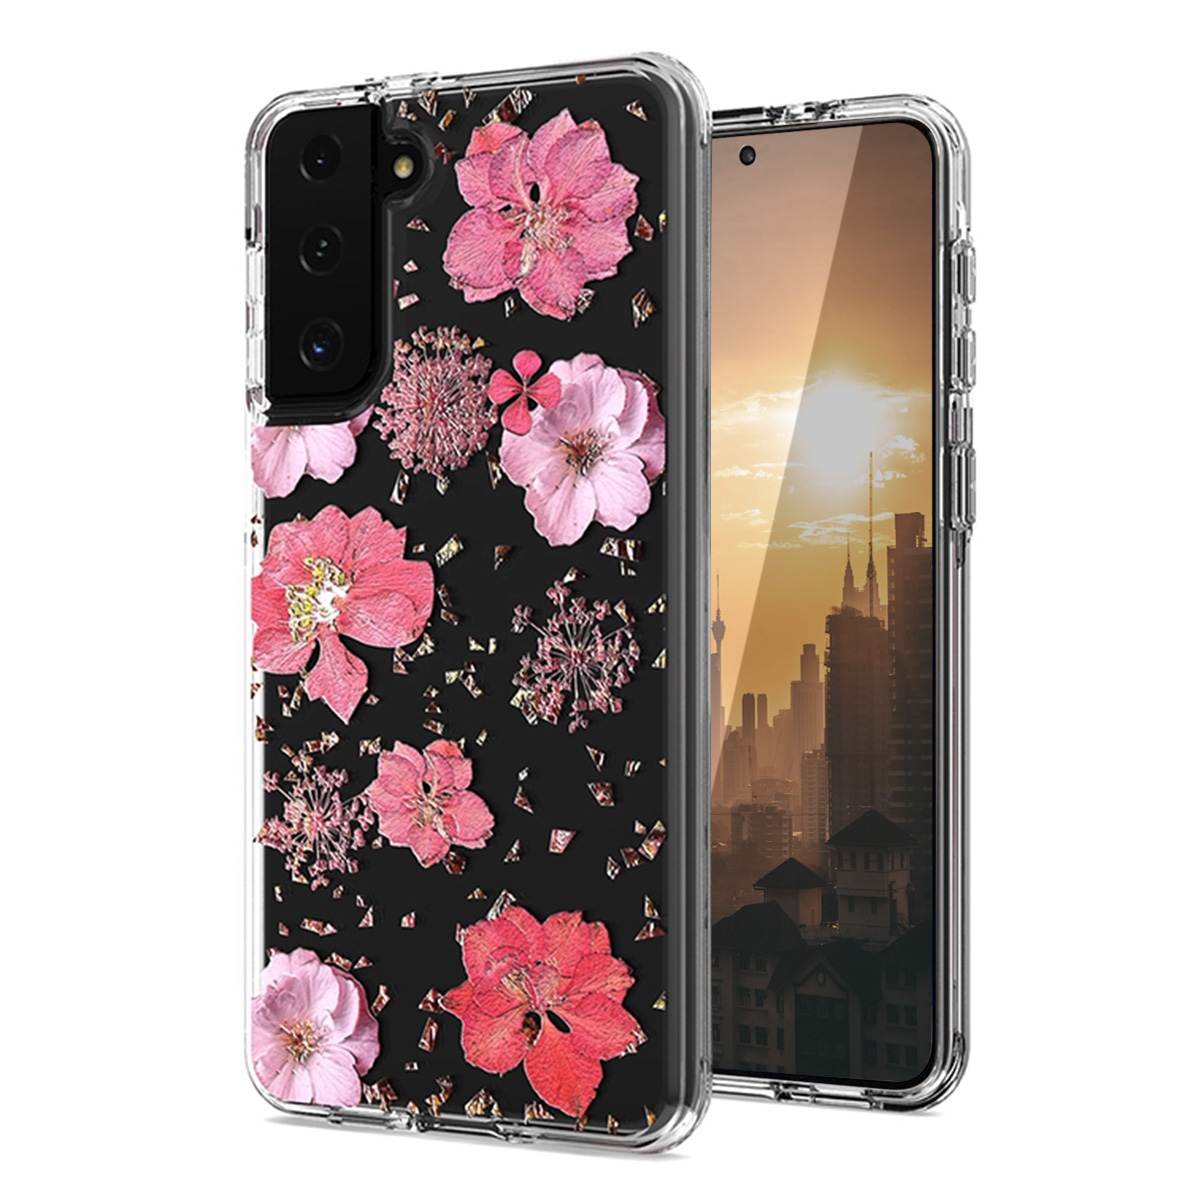 Galaxy S21+ Case, Cellularvilla Flower Design Hybrid Clear Shiny Sparkle Glitter Transparent Hybrid Protective Shockproof Dual Layer Protection Cover For Samsung Galaxy S21 Plus 5G (6.7 inch) (Pink) - image 1 of 1